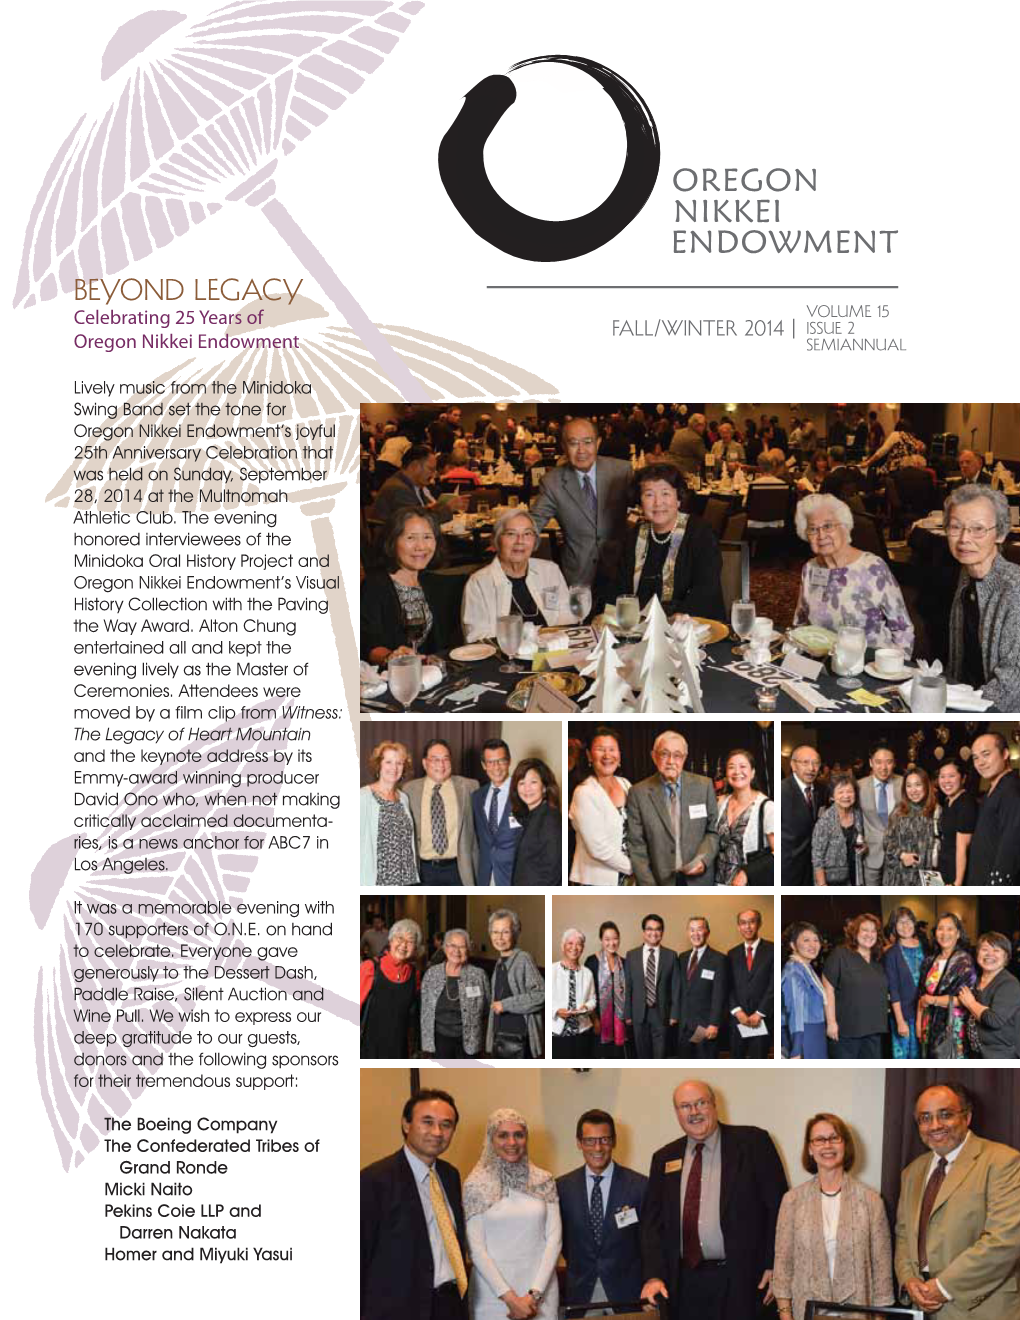 Beyond Legacy Celebrating 25 Years of Volume 15 FALL/Winter 2014 | Issue 2 Oregon Nikkei Endowment Semiannual